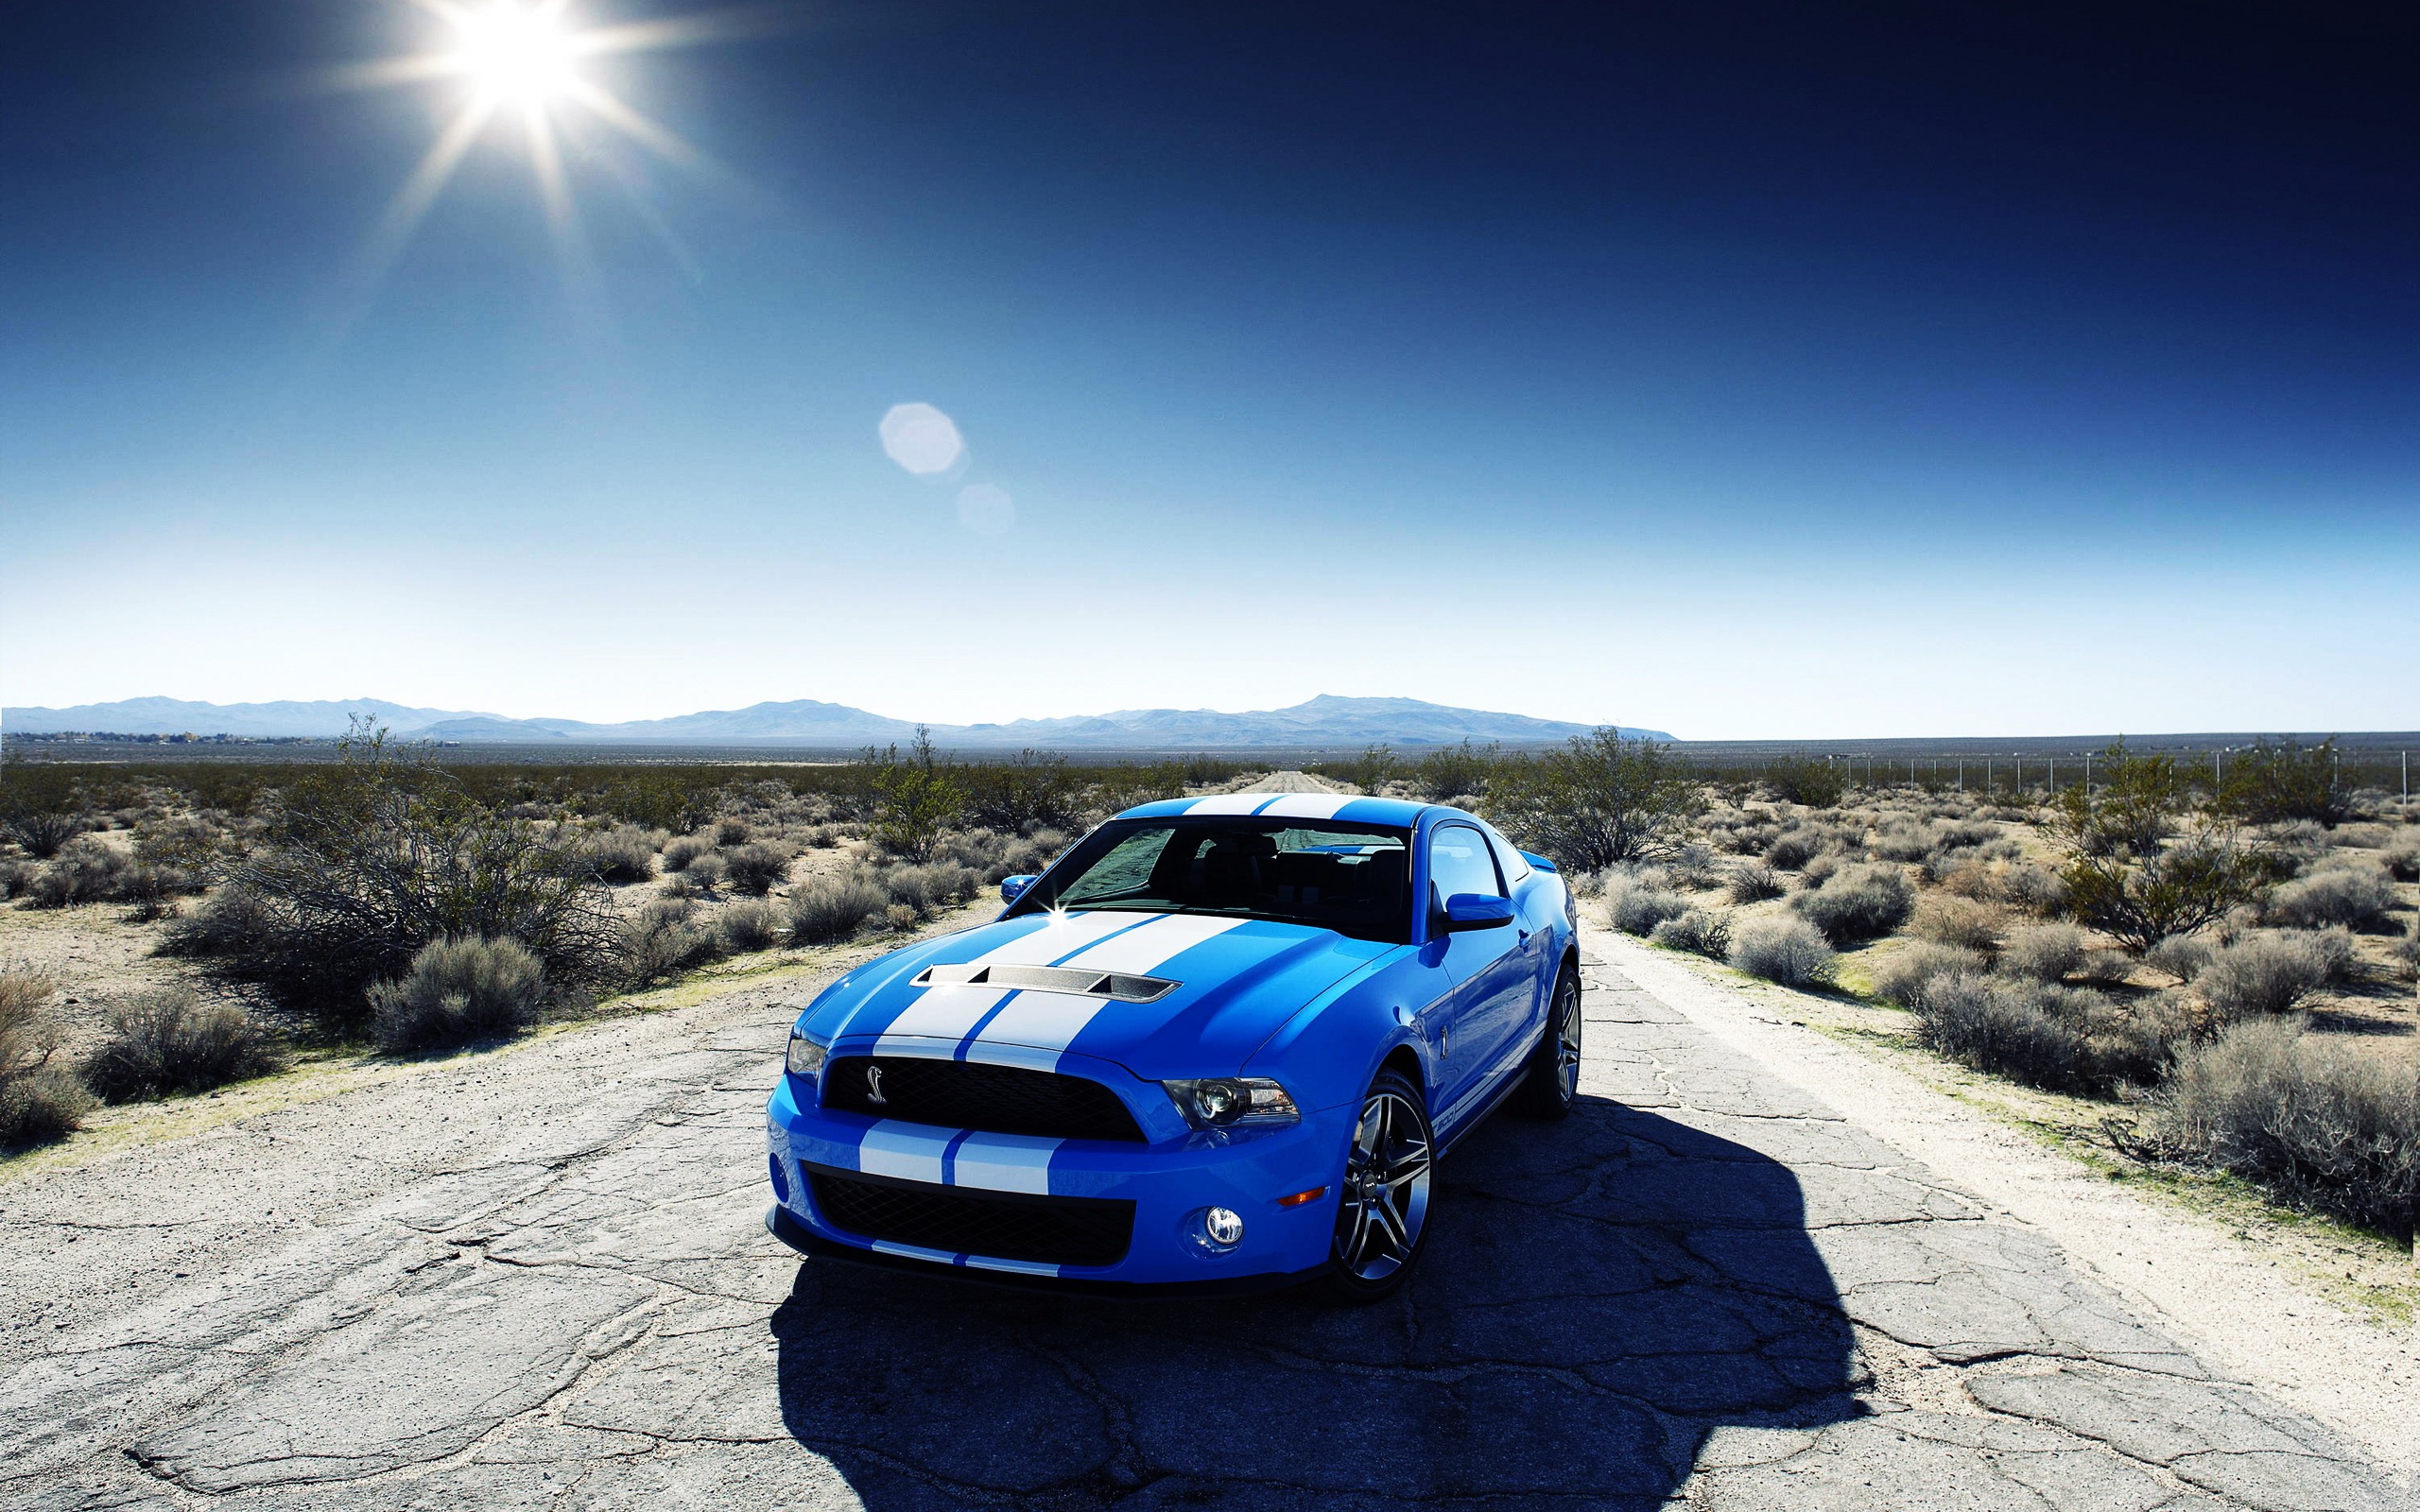 For Great Deals On Ford Mustang Parts And Fan Souvenirs Check Out